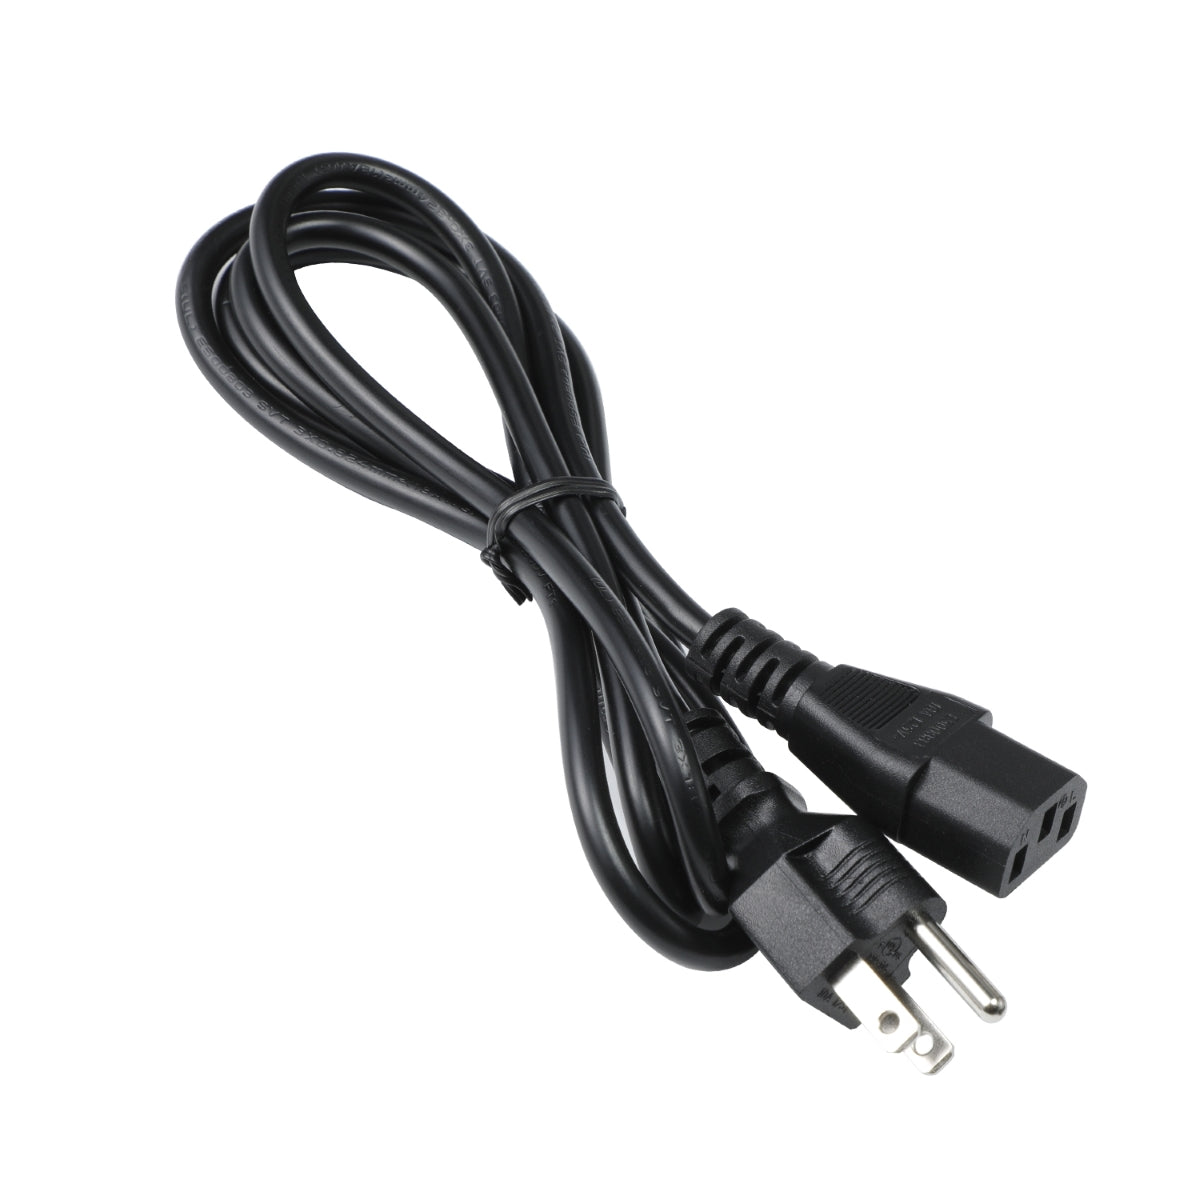 Power Cord for HP Pavilion Power 580-027c Computer.